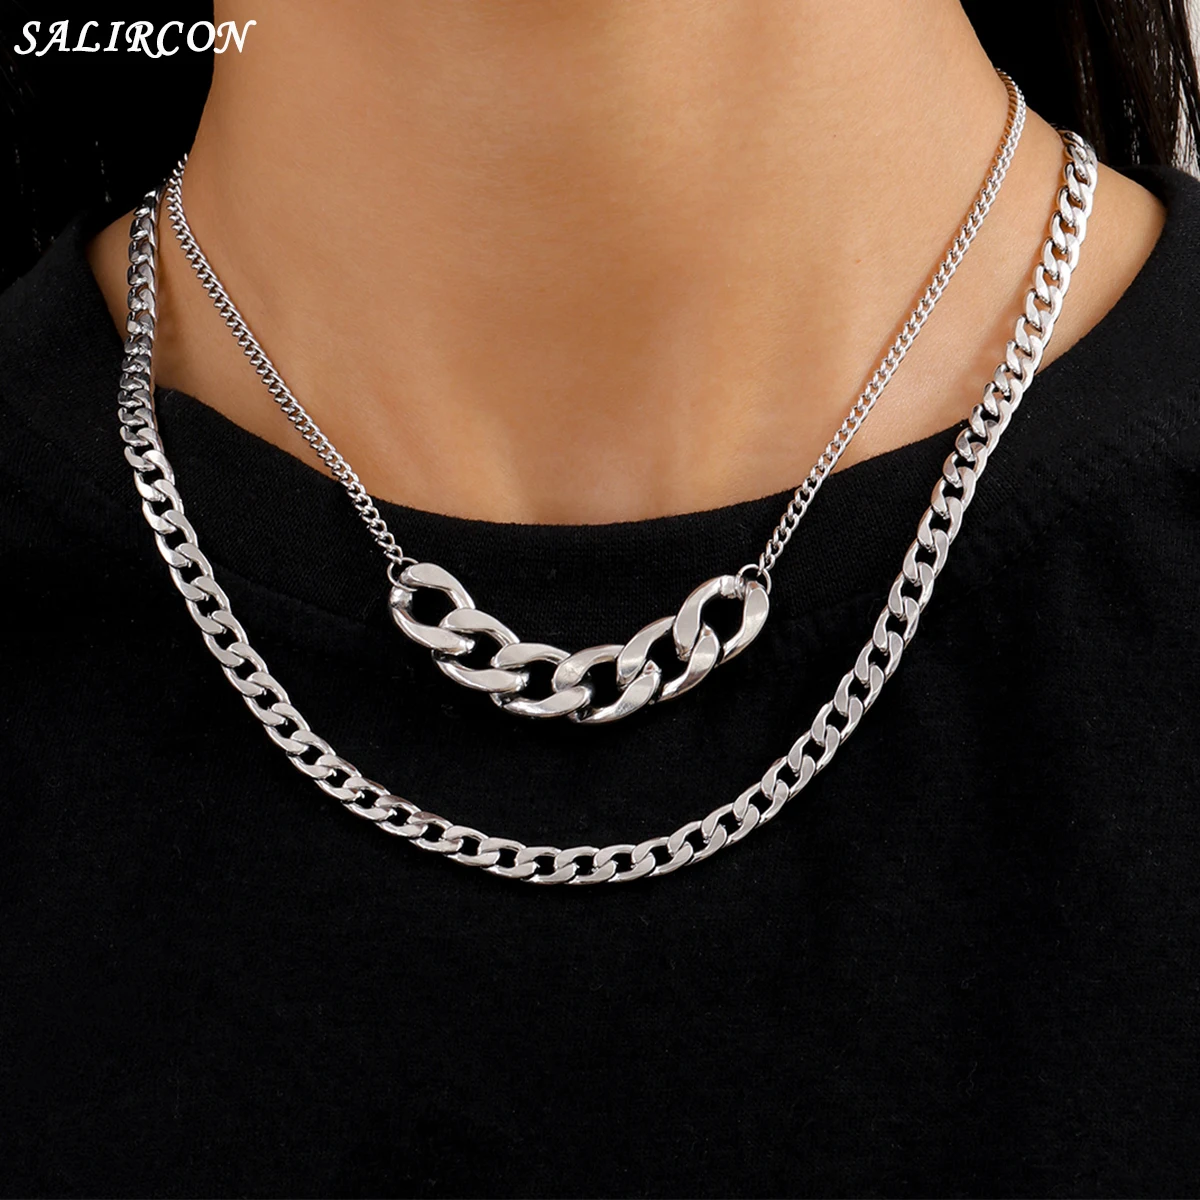 

Punk Stainless Steel Chains Choker Necklace for Women Men Goth Aesthetic Layered Silver Color Chain on the Neck Kpop Jewelry